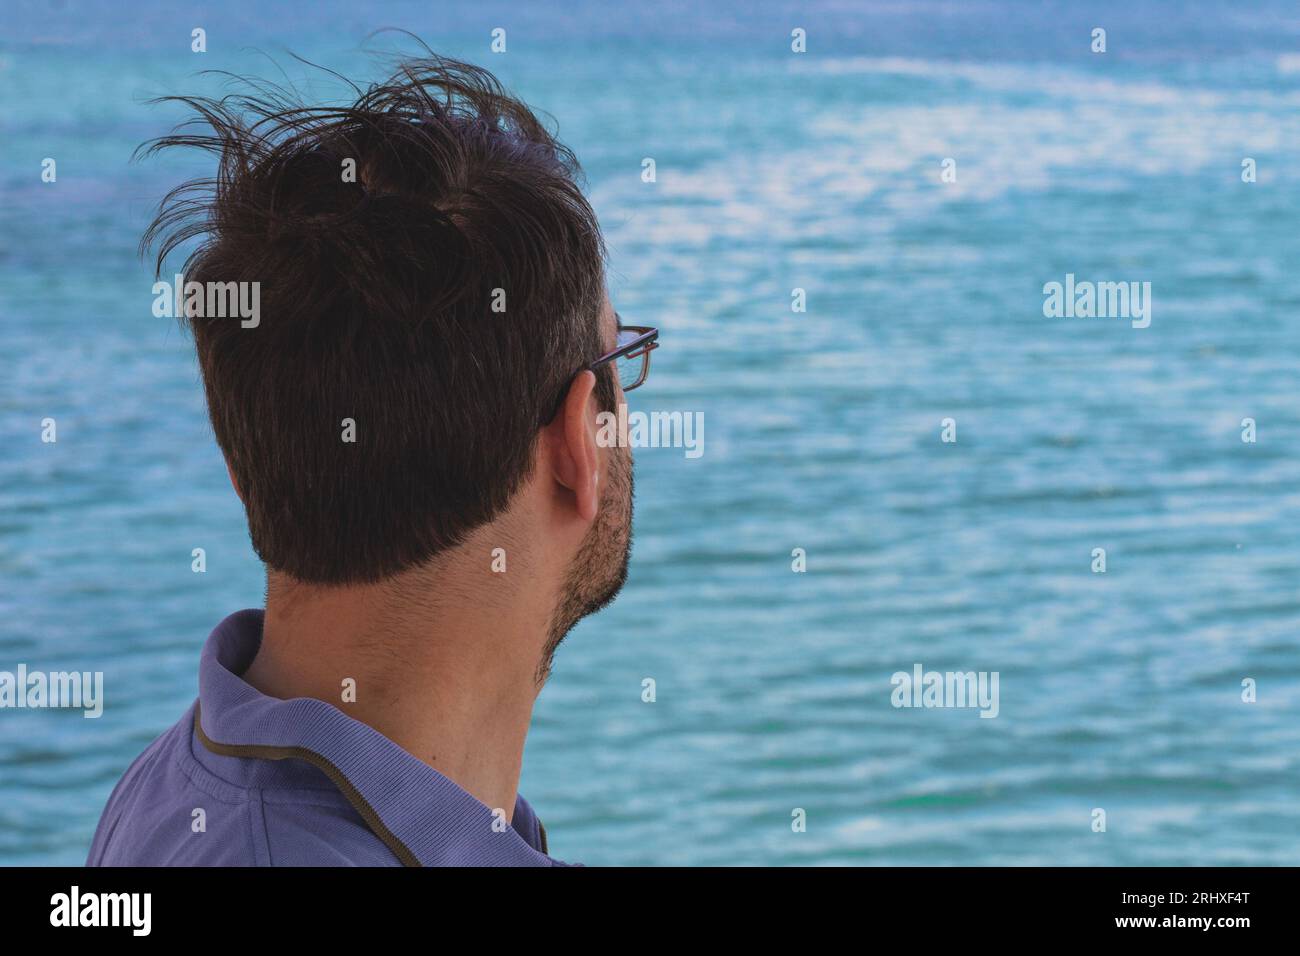 Rear view of a man watching the sea. Copy space Stock Photo